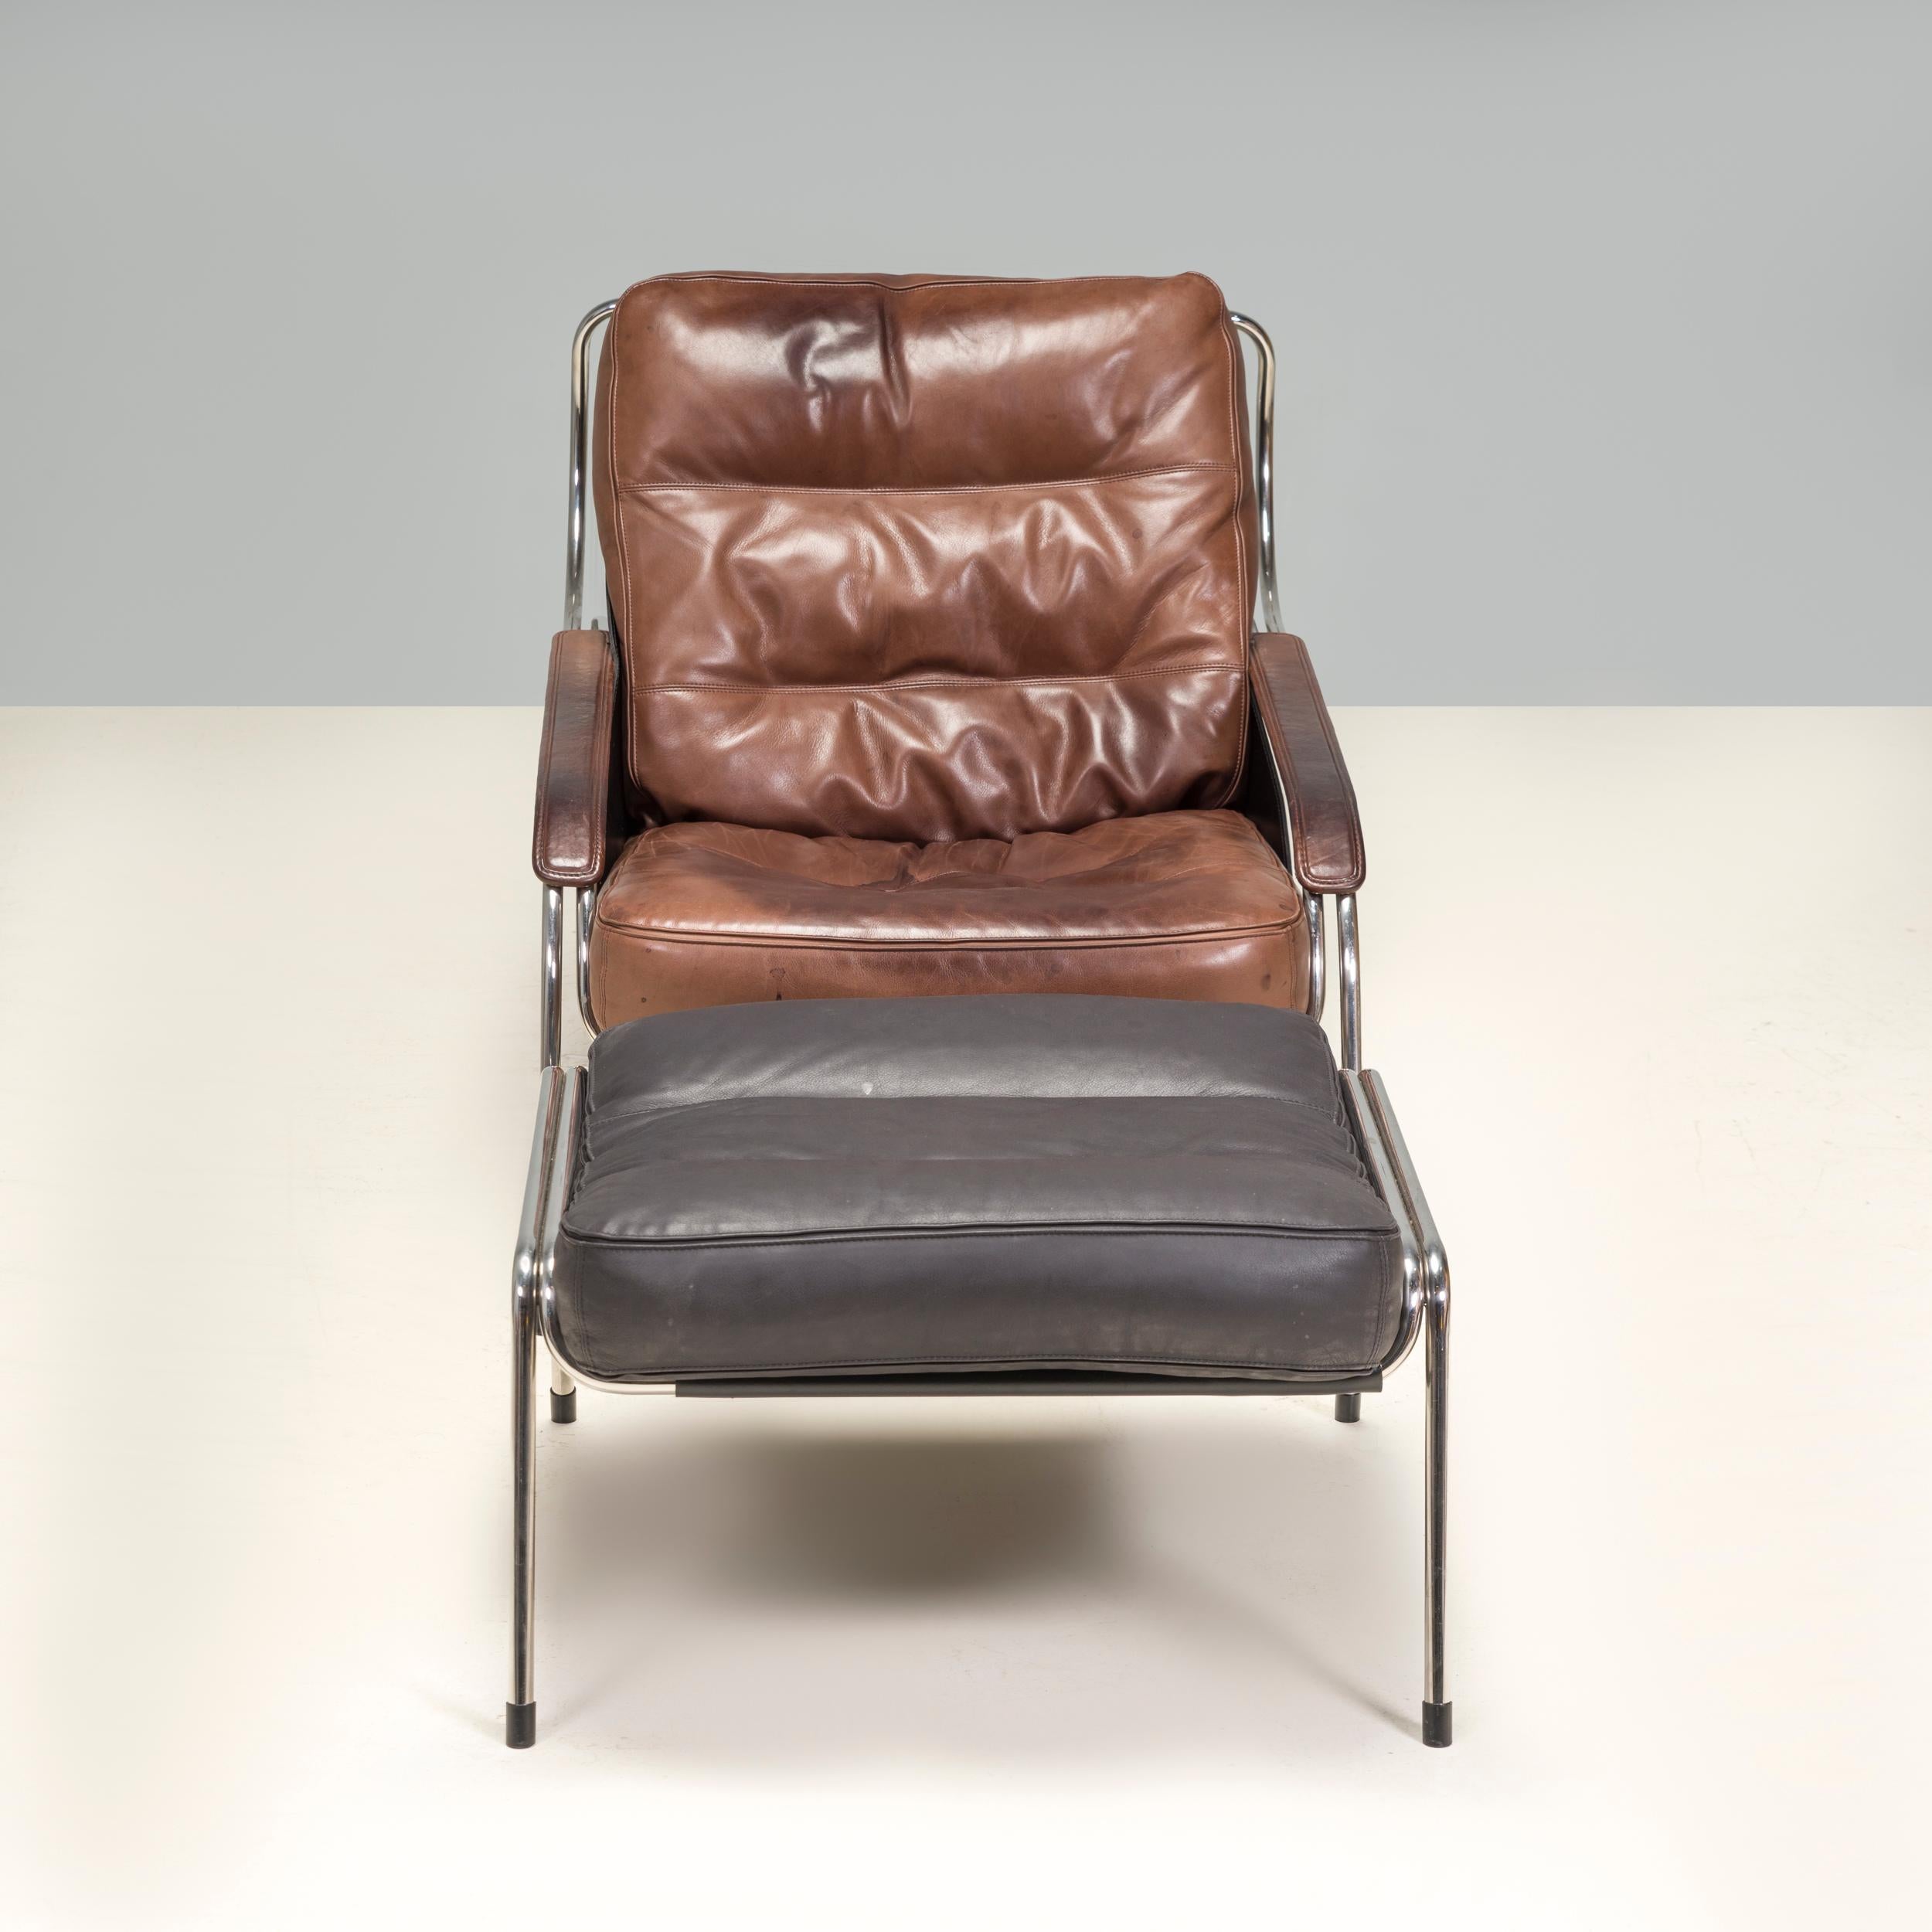 Originally designed by Marco Zanuso in 1947 for a competition sponsored by the Museum of Modern Art in New York, the Maggiolina lounge chair has gone on to become a design icon and has been manufactured by Zanotta since 1972.

A fantastic example of